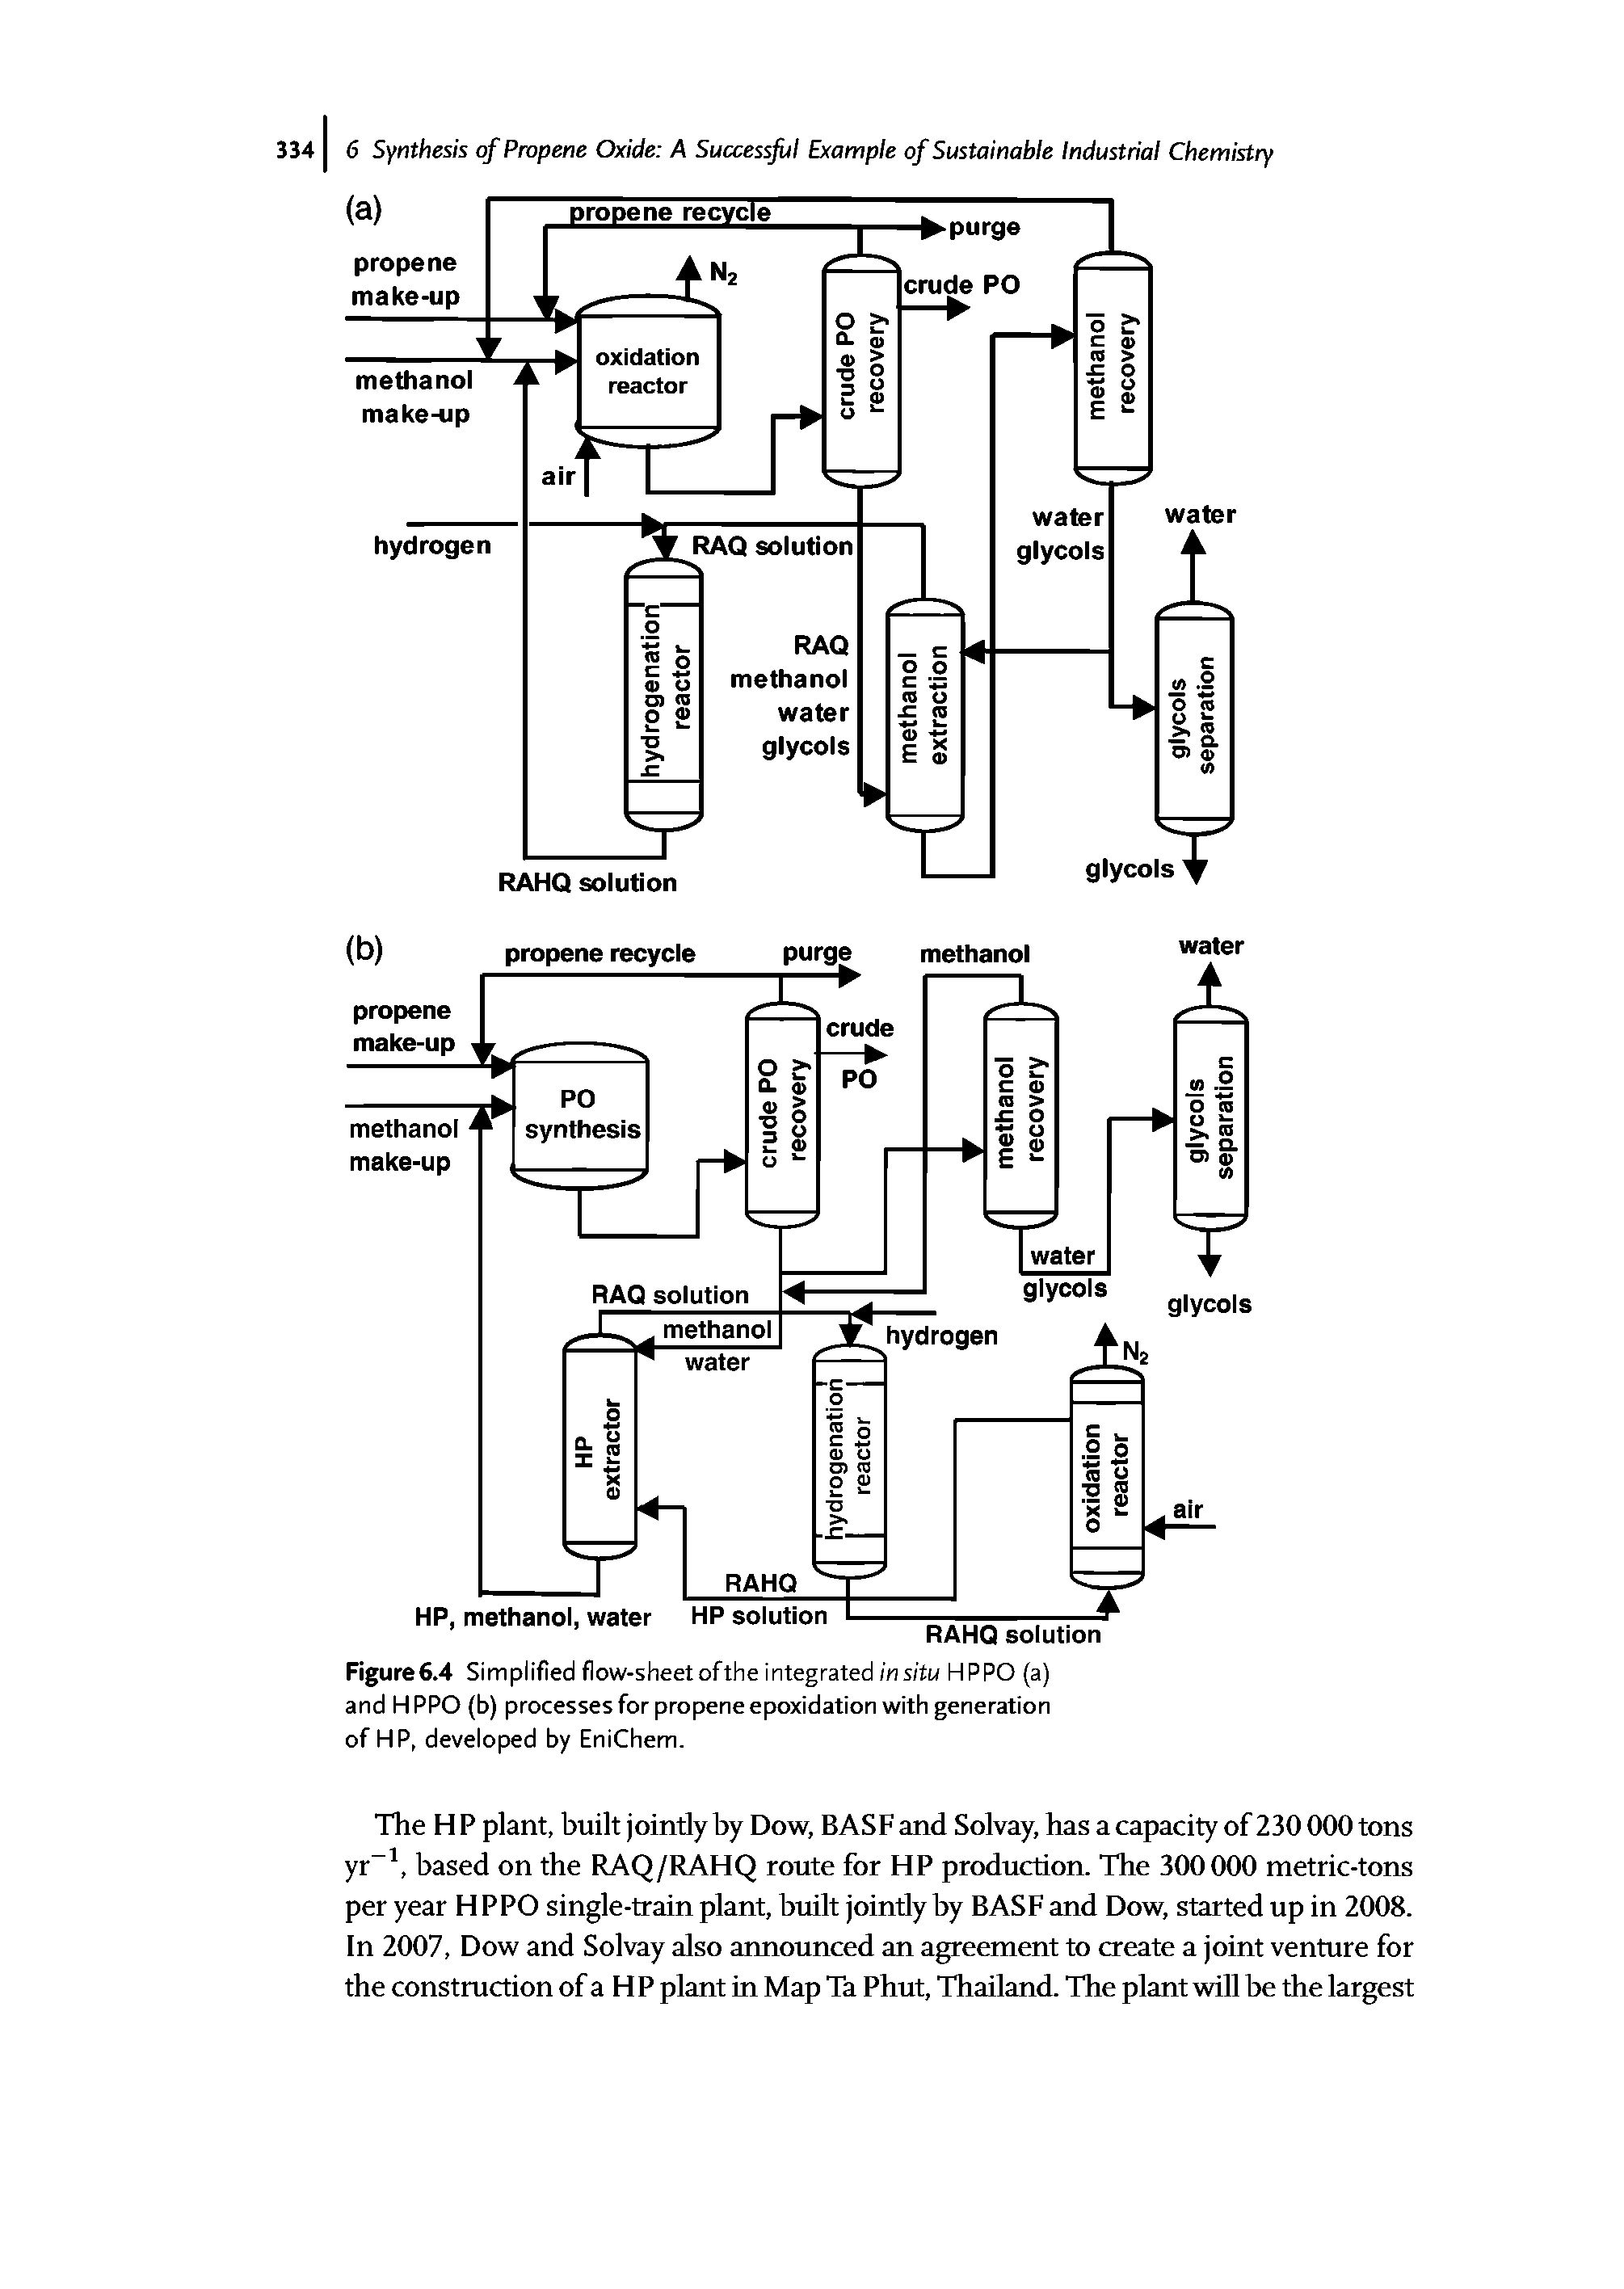 Figure 6.4 Simplified flow-sheet ofthe integrated insitu HPPO (a) and H PPO (b) processes for propene epoxidation with generation of HP, developed by EniChem.